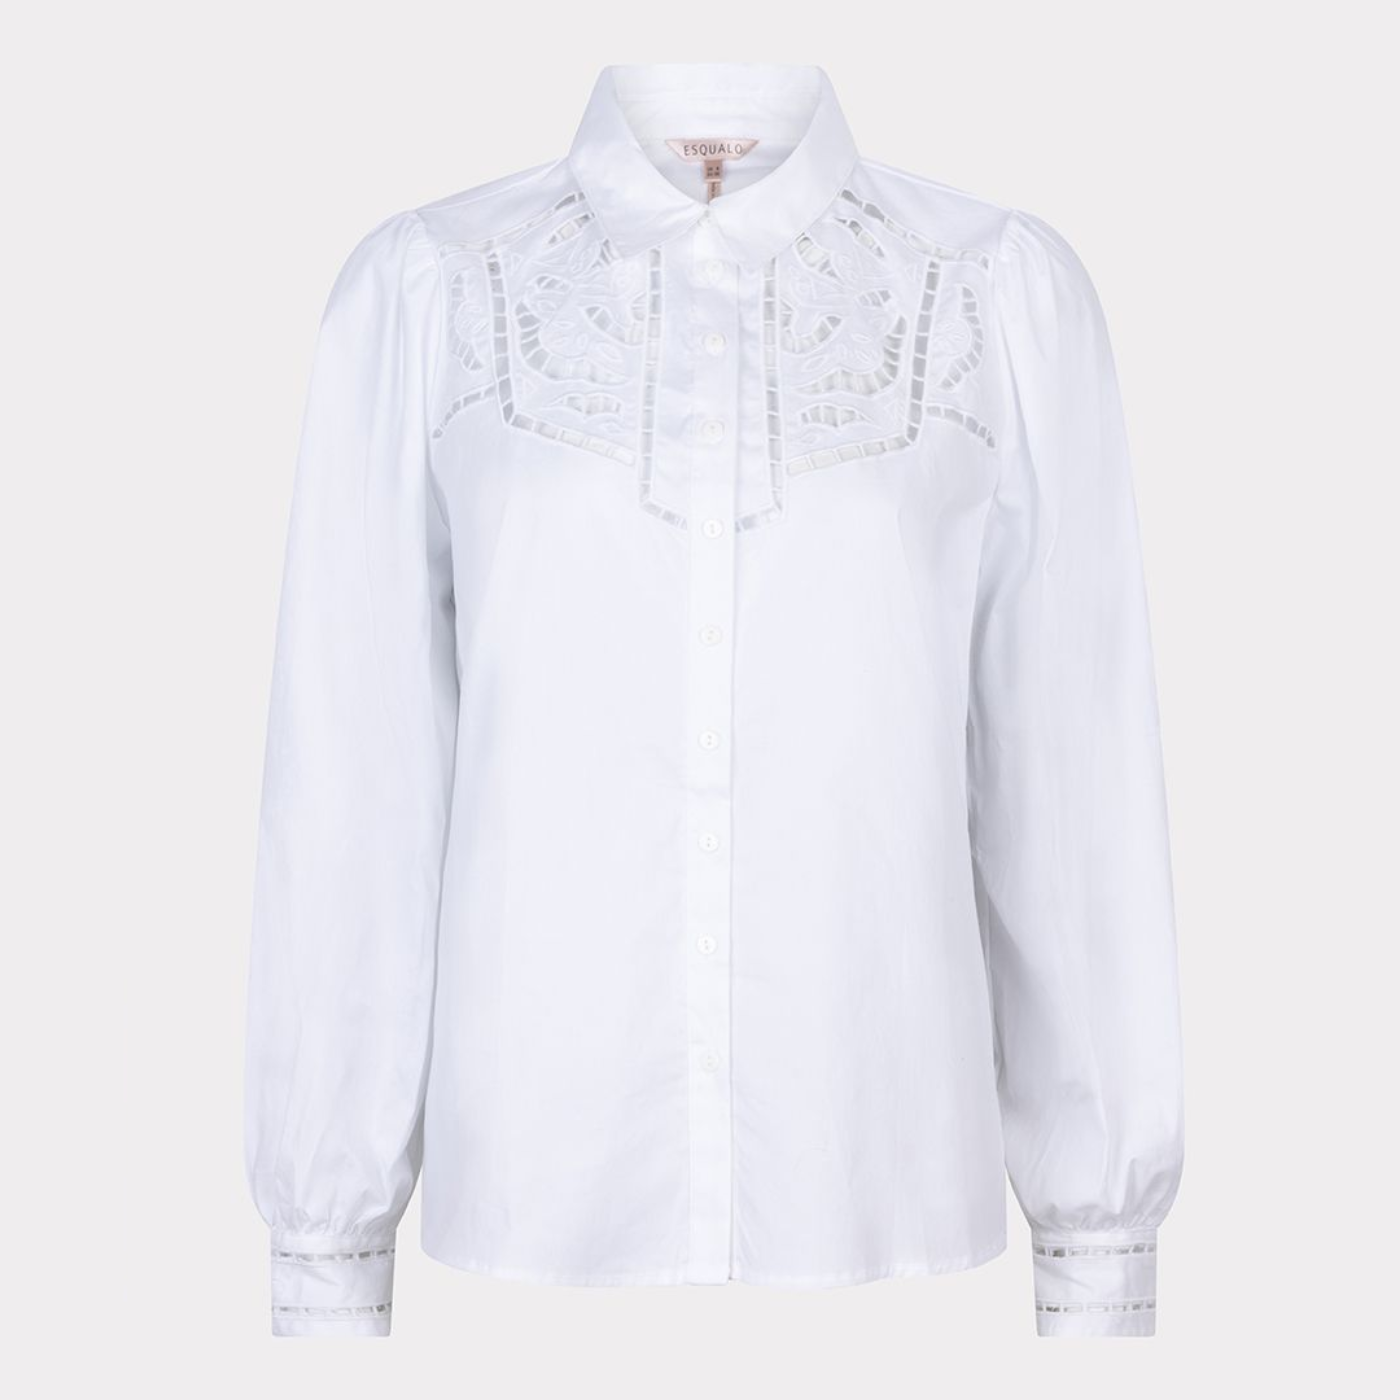 esqualo blouse in white colour showing front of blouse